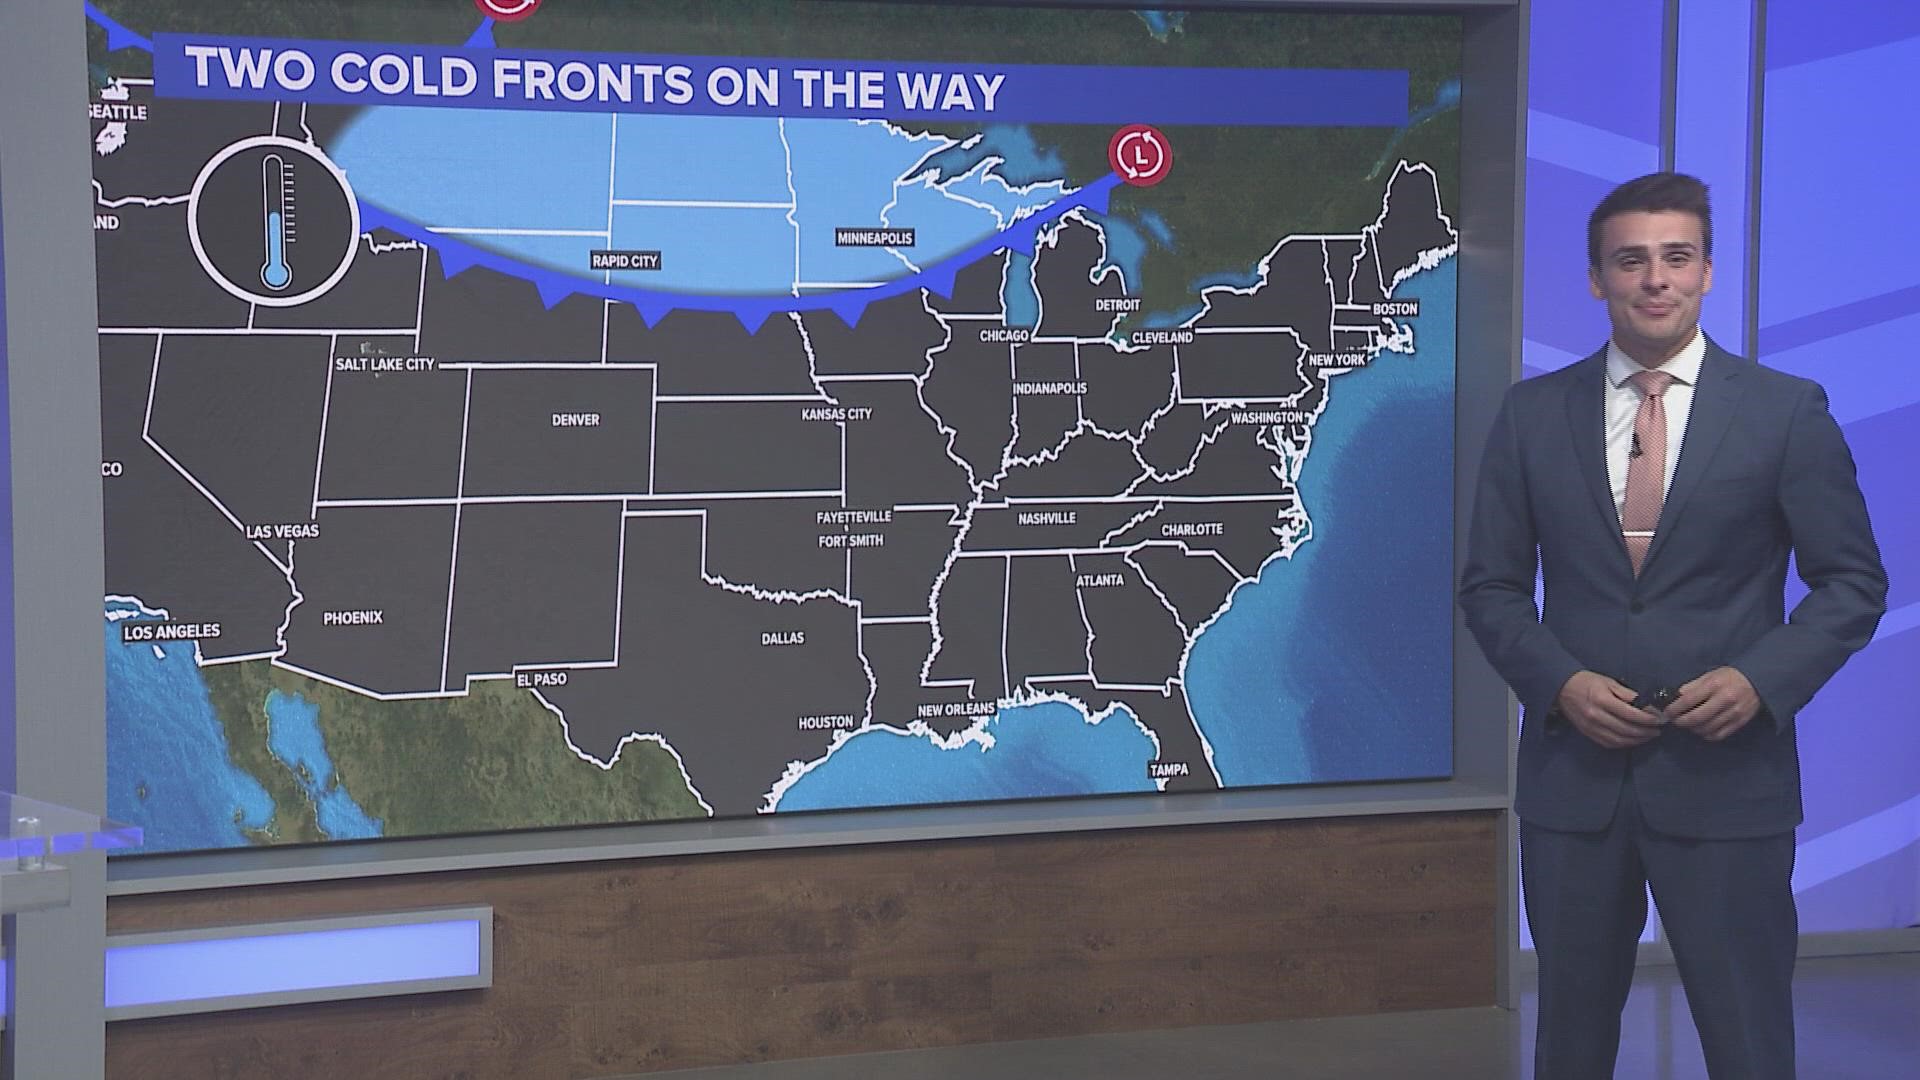 A powerful cold front is marching south, dropping temperatures from 10-30 degrees across the U.S. after record-breaking heat for the end of summer.